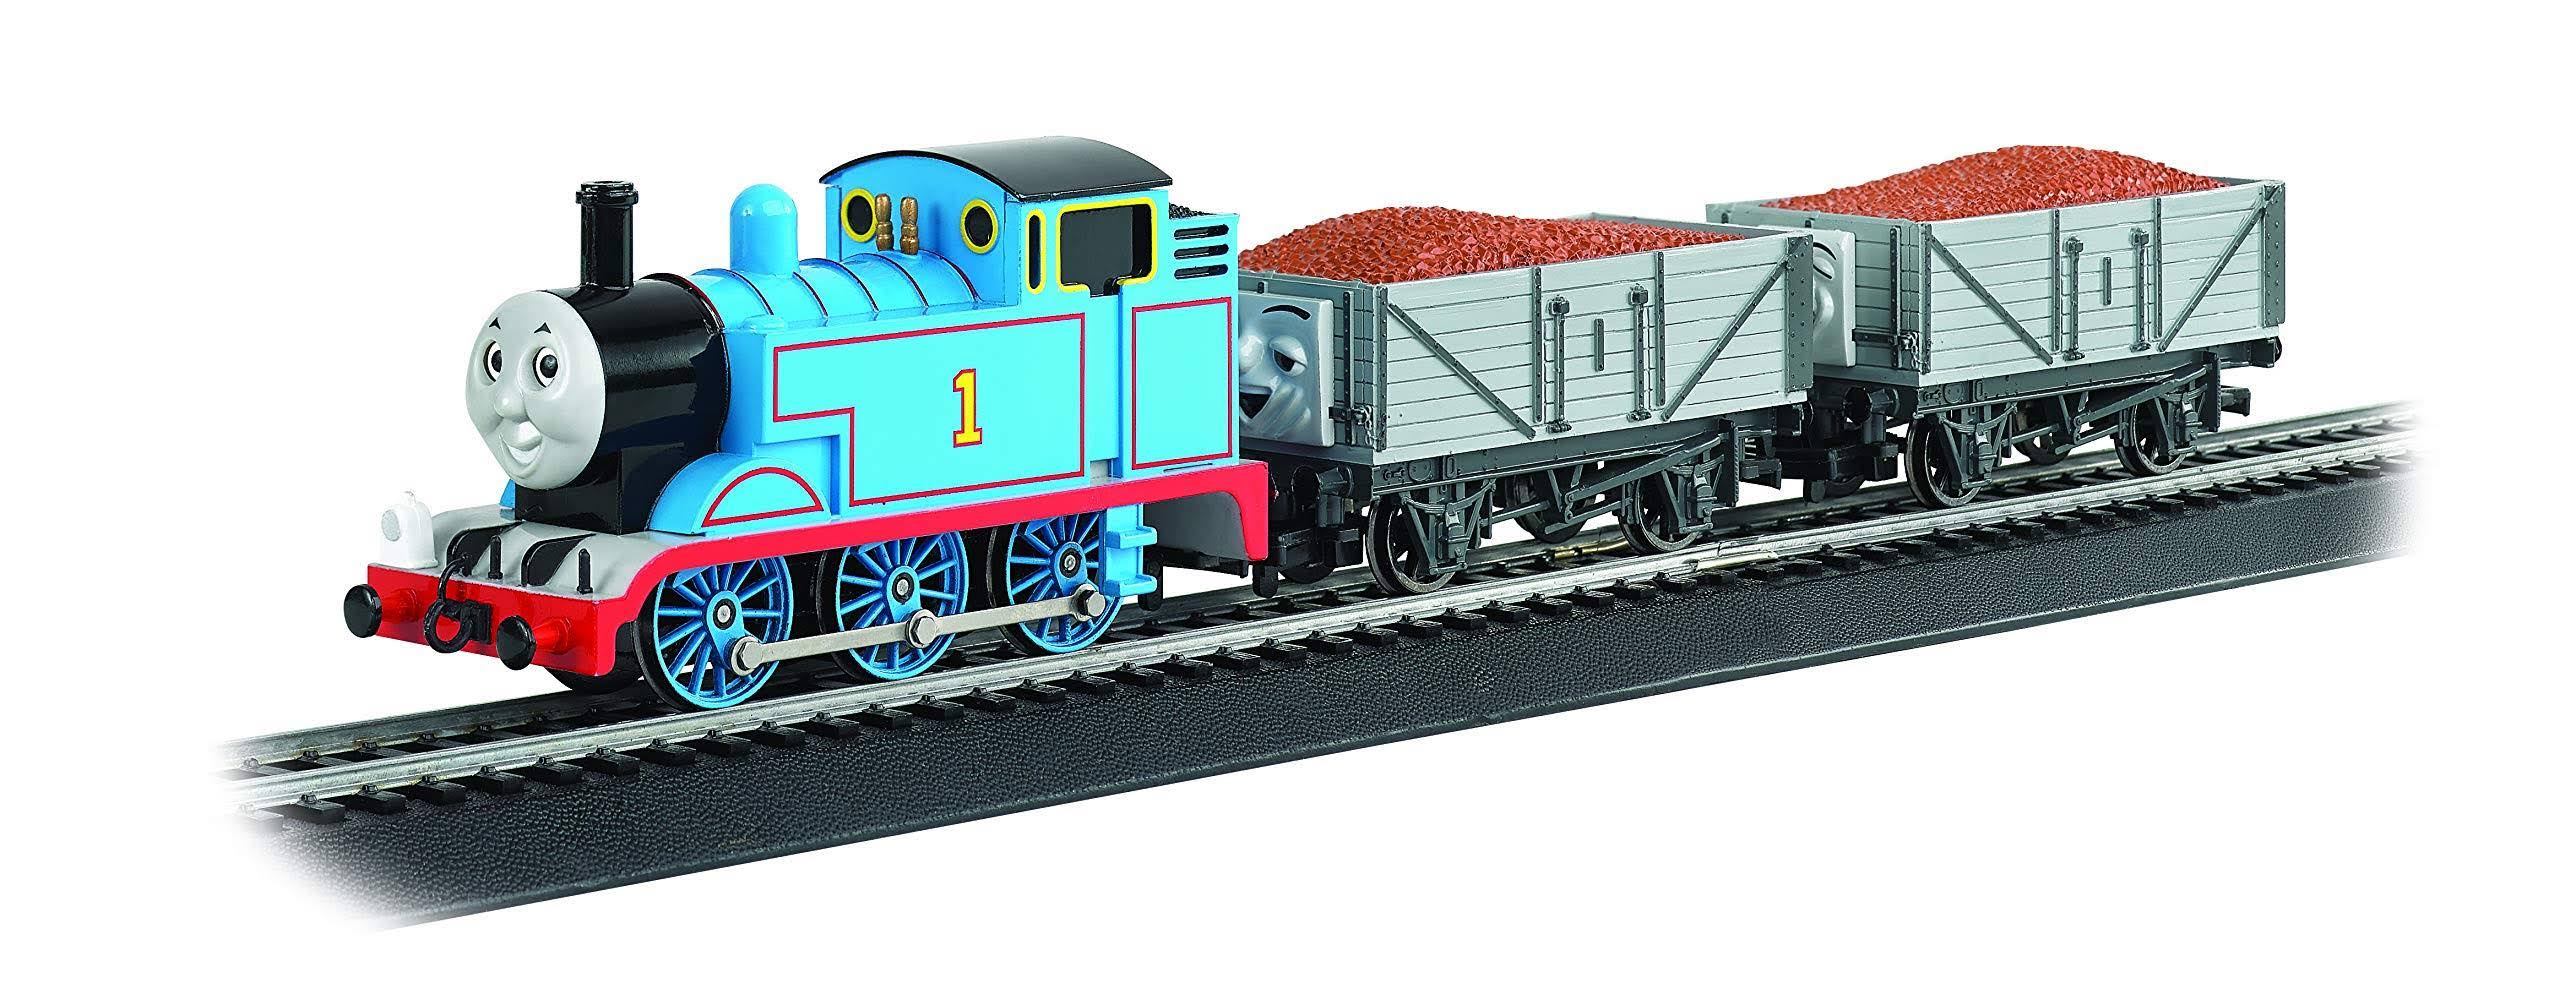 Bachmann Trains - Deluxe Thomas & The TROUBLESOME Trucks Freight Set - Loco w/Moving Eyes - HO Scale, Blue